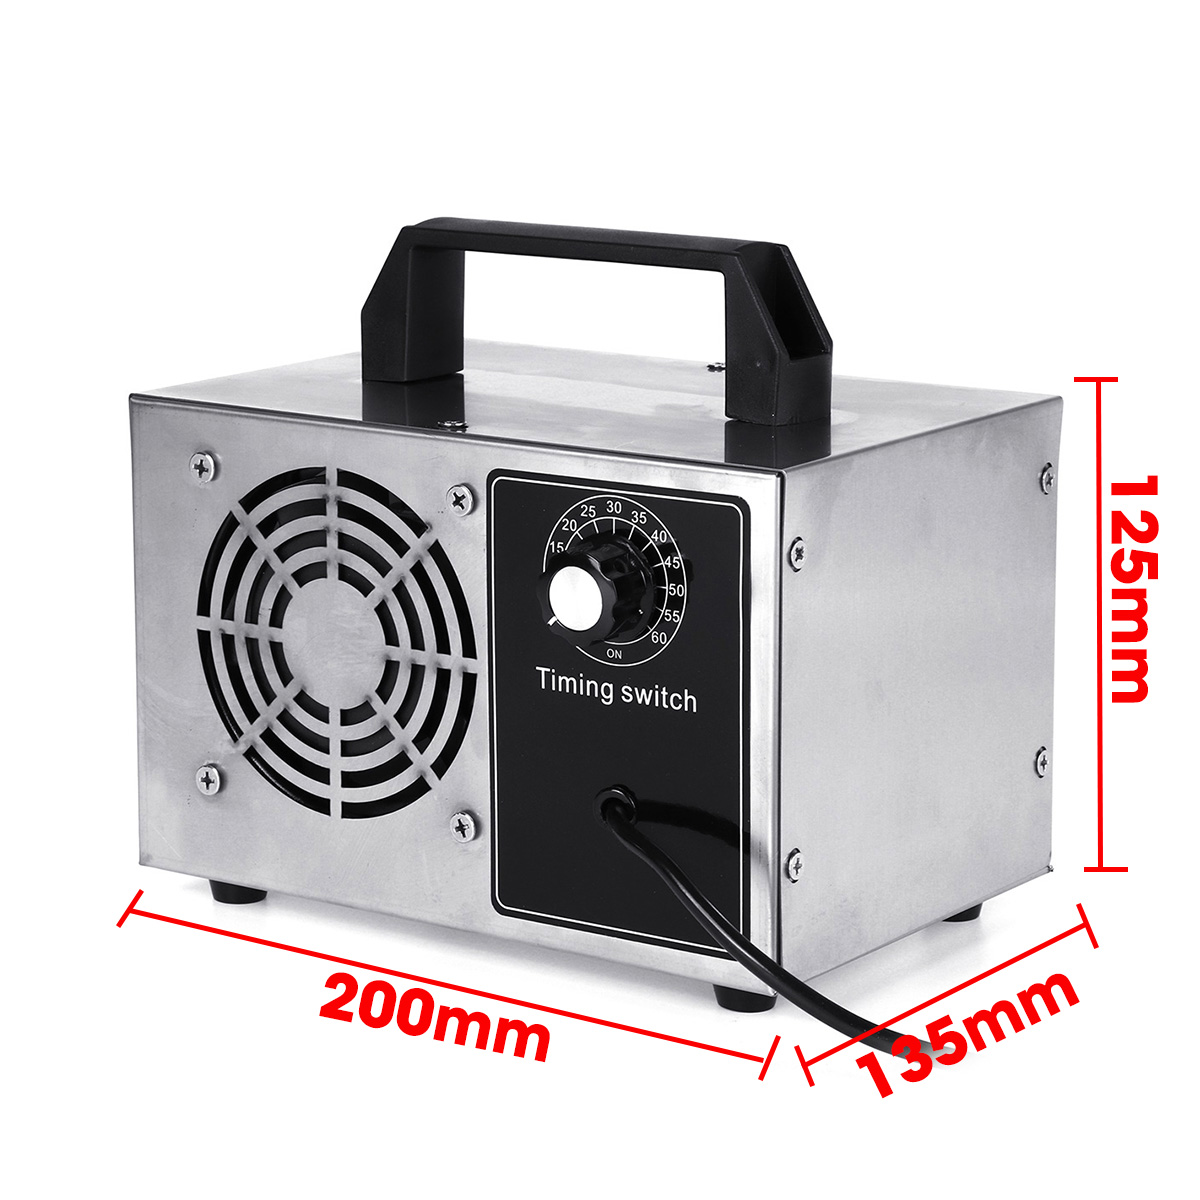 220V-Ozone-Generator-Commercial-Long-Life-Timing-Purifier-Air-Cleaner-Deodorizer-1710921-3